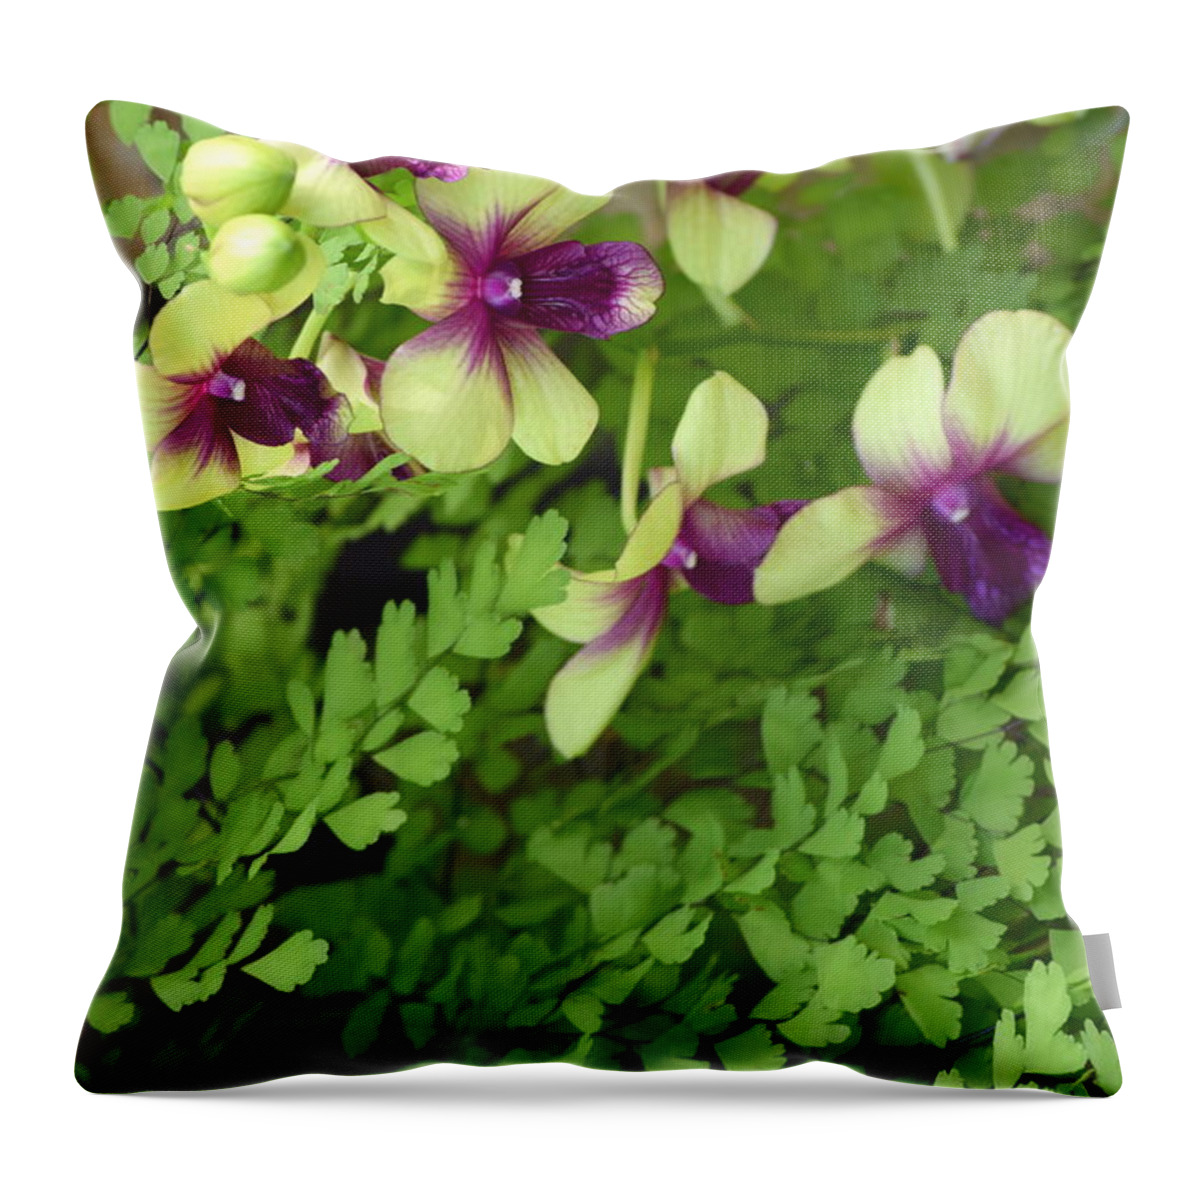 Floral Throw Pillow featuring the photograph Contrasts #1 by Deborah Crew-Johnson